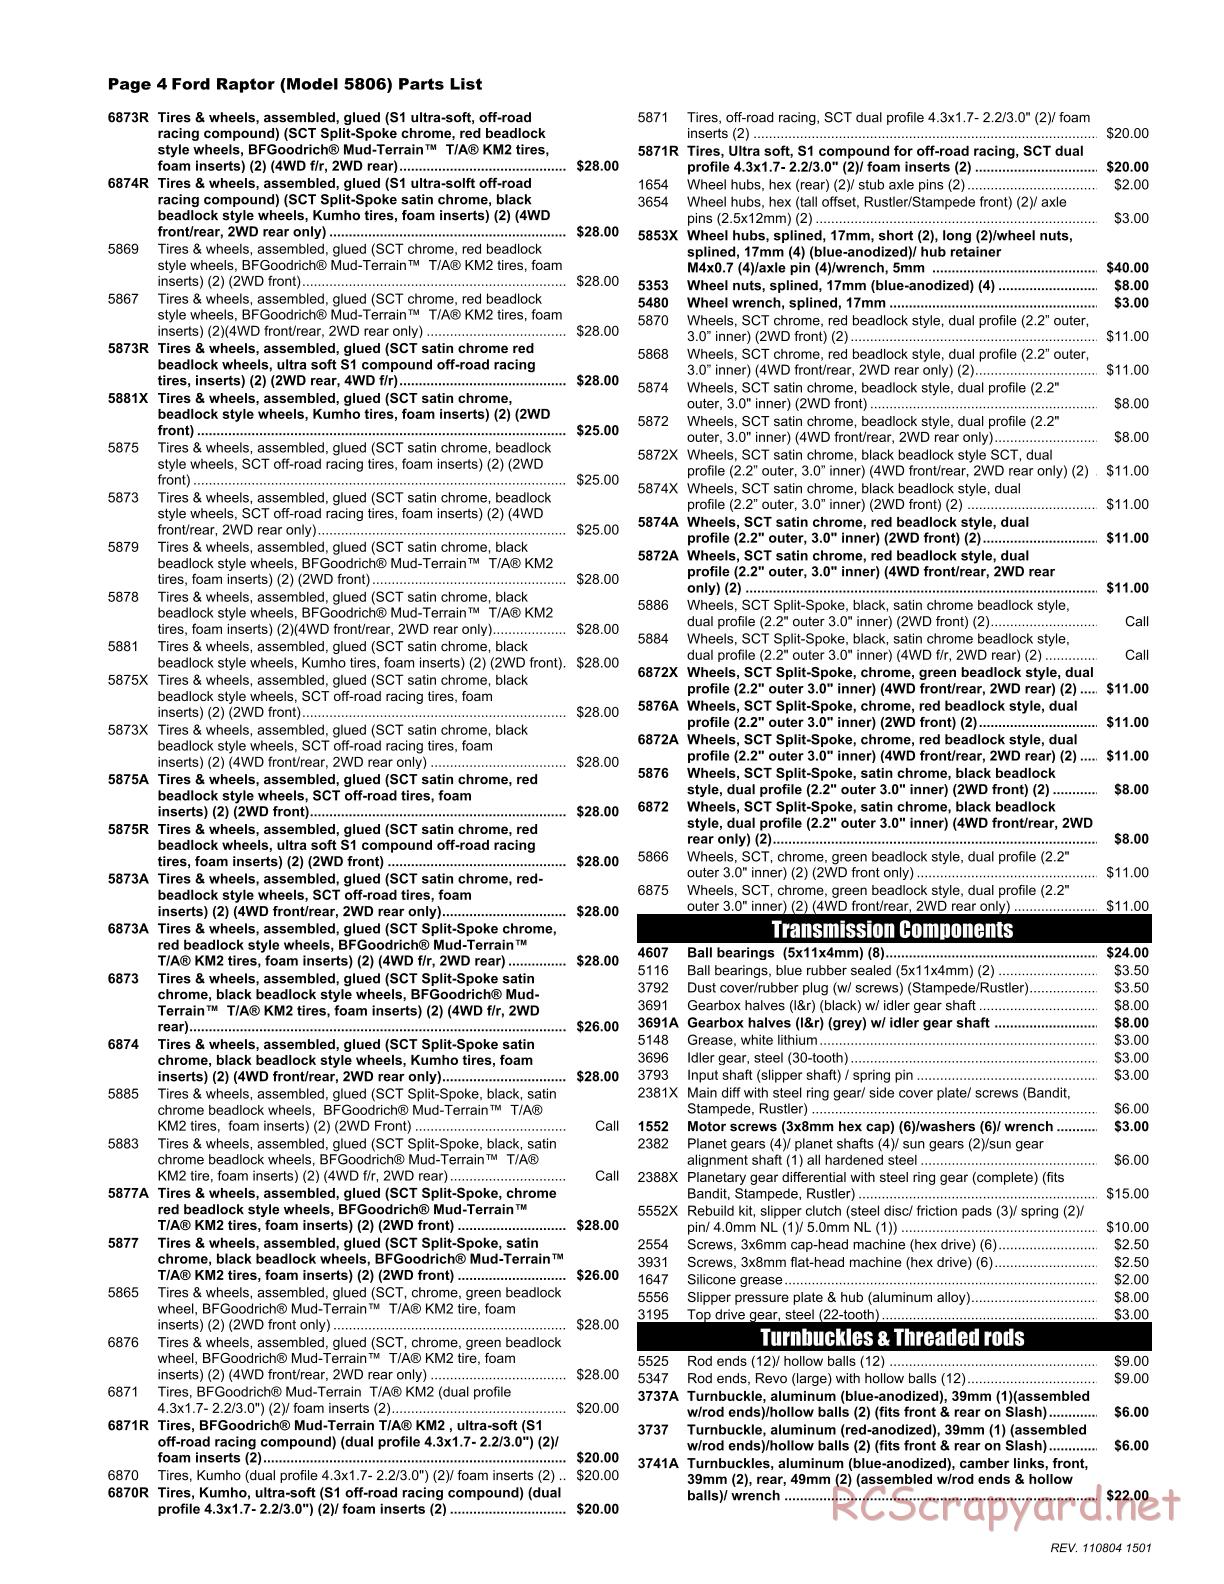 Traxxas - Ford F-150 SVT Raptor (2011) - Parts List - Page 4